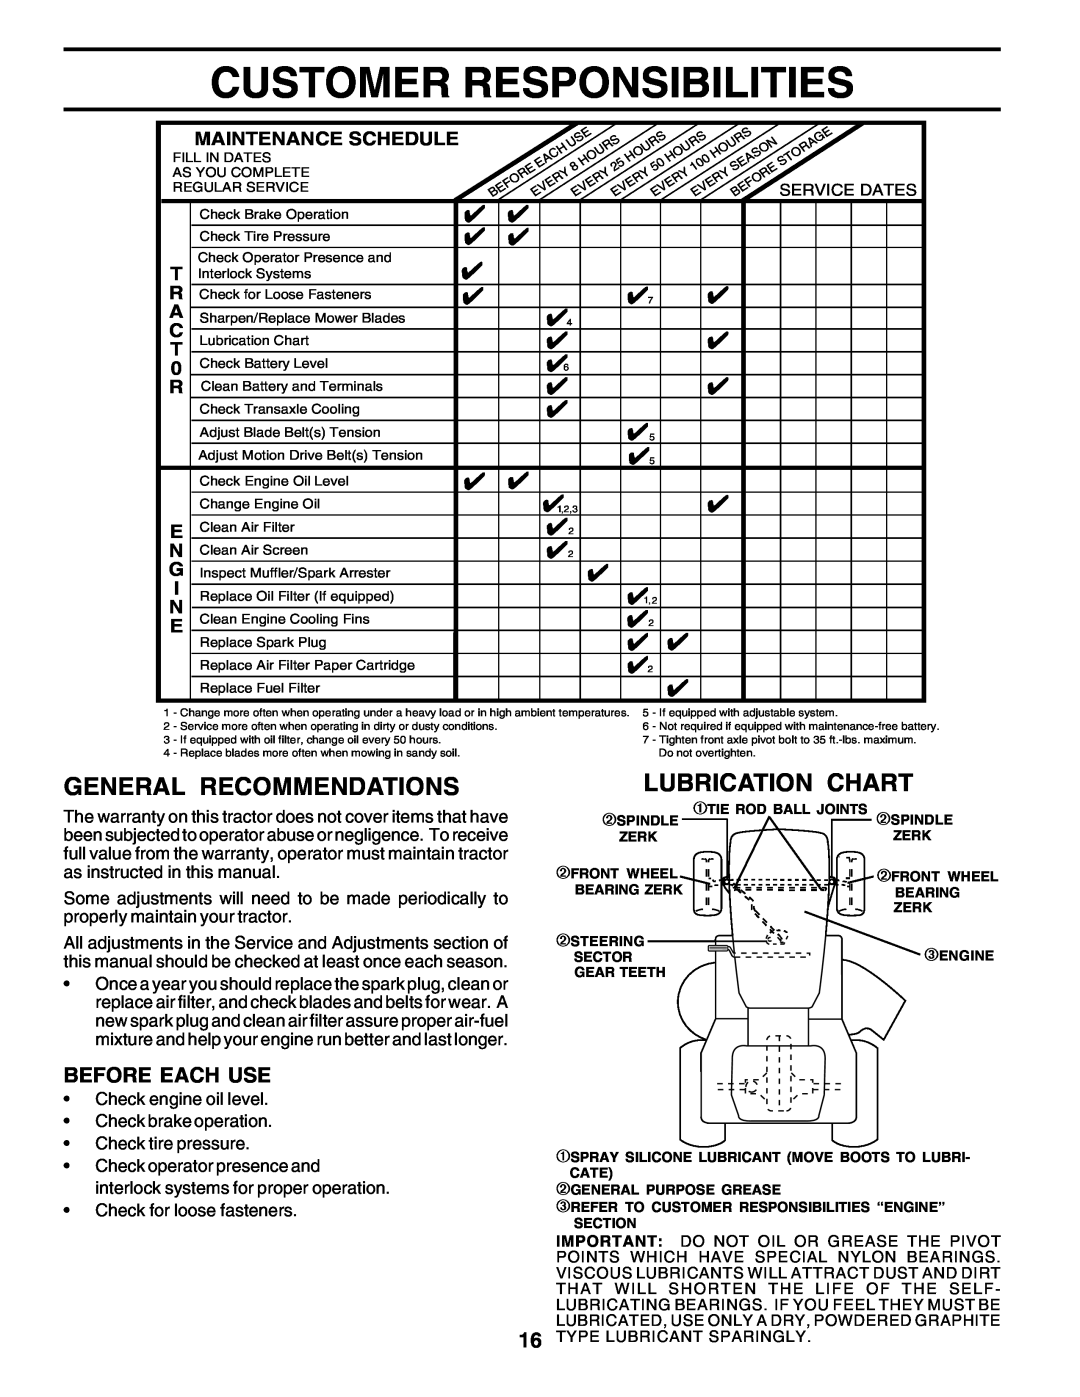 Poulan PRGT22H50D owner manual Customer Responsibilities, General Recommendations, Lubrication Chart¡, Before Each Use 